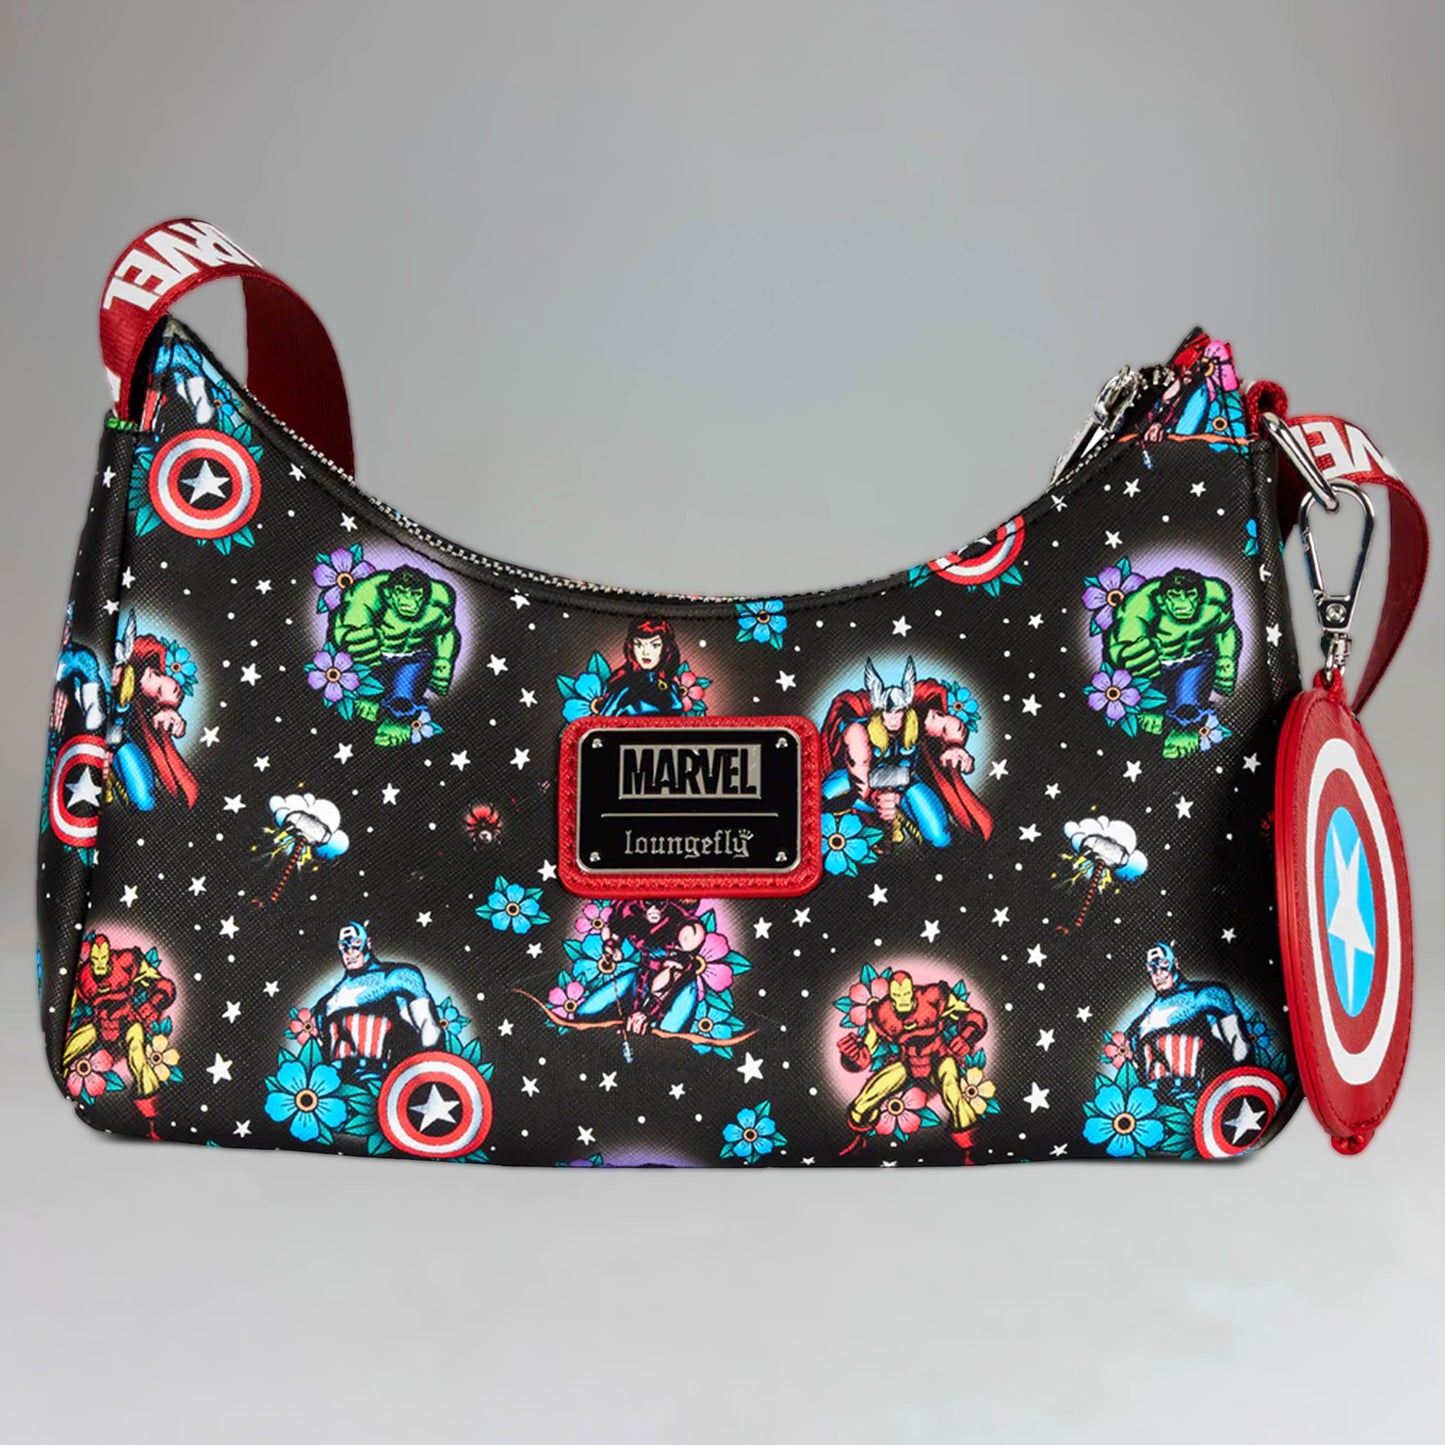 Heart Home School Bag For Girls, Boys|Marvel Avengers Print Kids School Bag|4  Compartment With Durable Zip (Blue) : Amazon.in: Bags, Wallets and Luggage